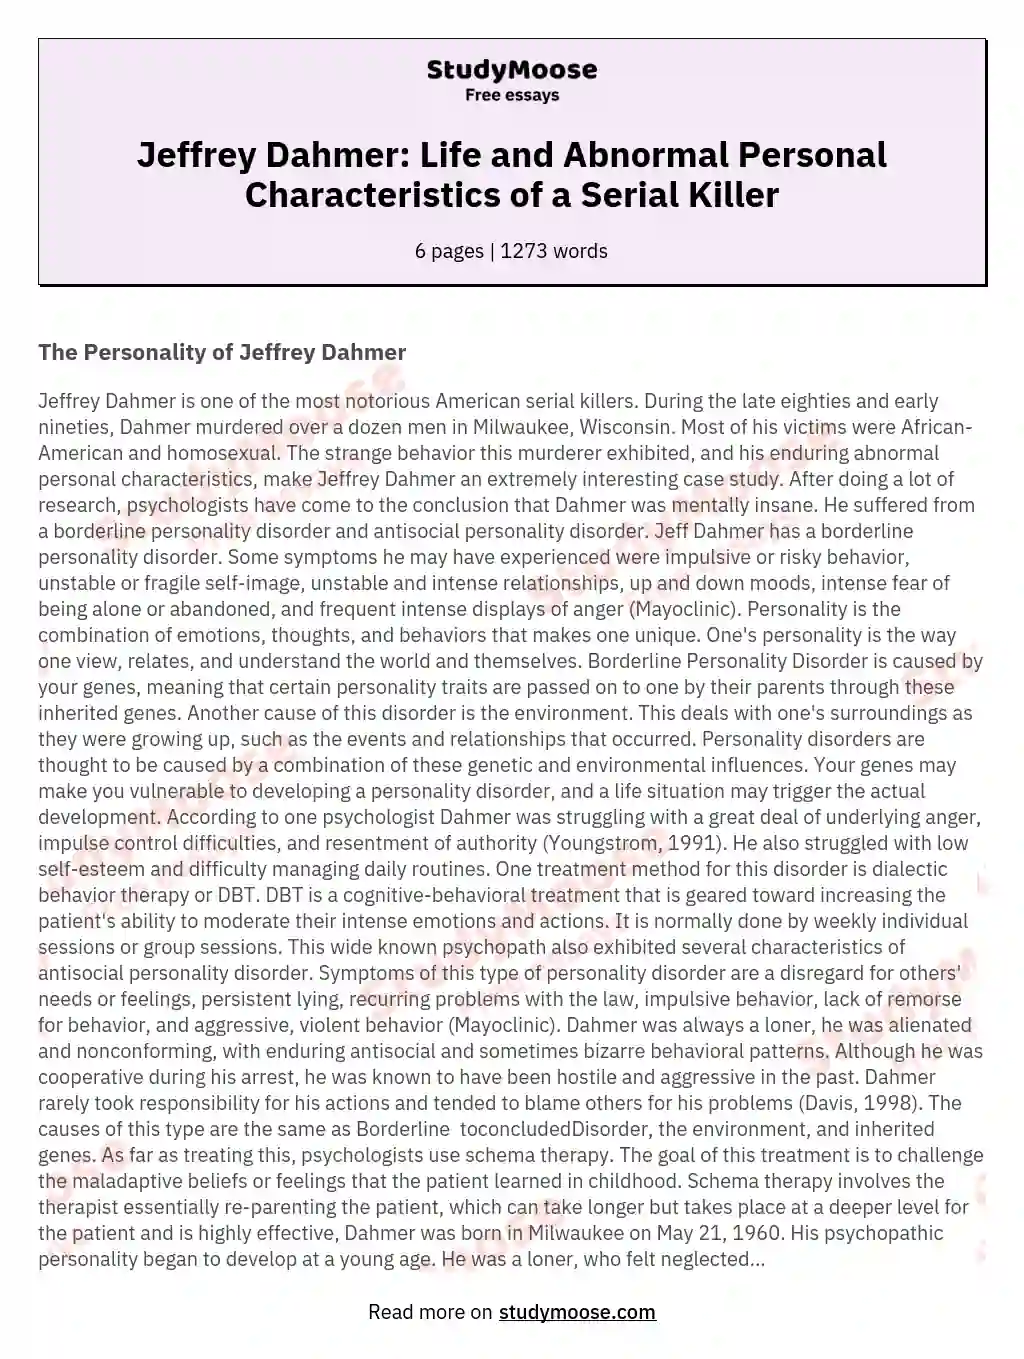 Jeffrey Dahmer: Life and Abnormal Personal Characteristics of a Serial Killer essay